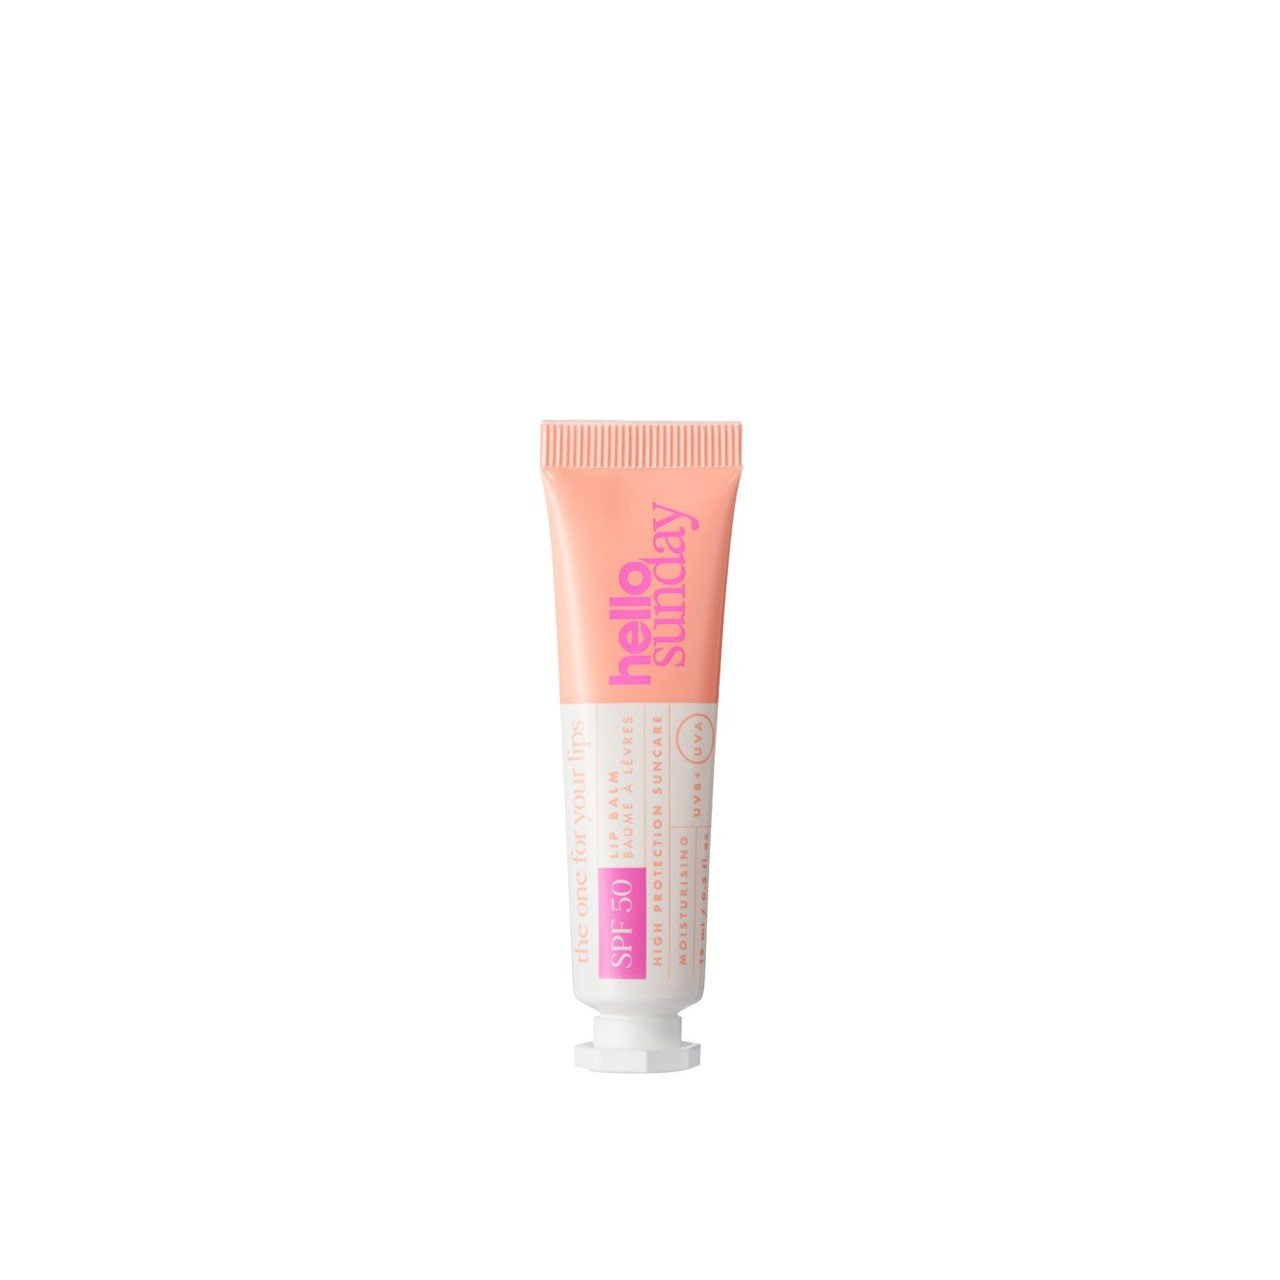 Hello Sunday The One For Your Lips Lip Balm SPF50 15ml (0.51fl oz)